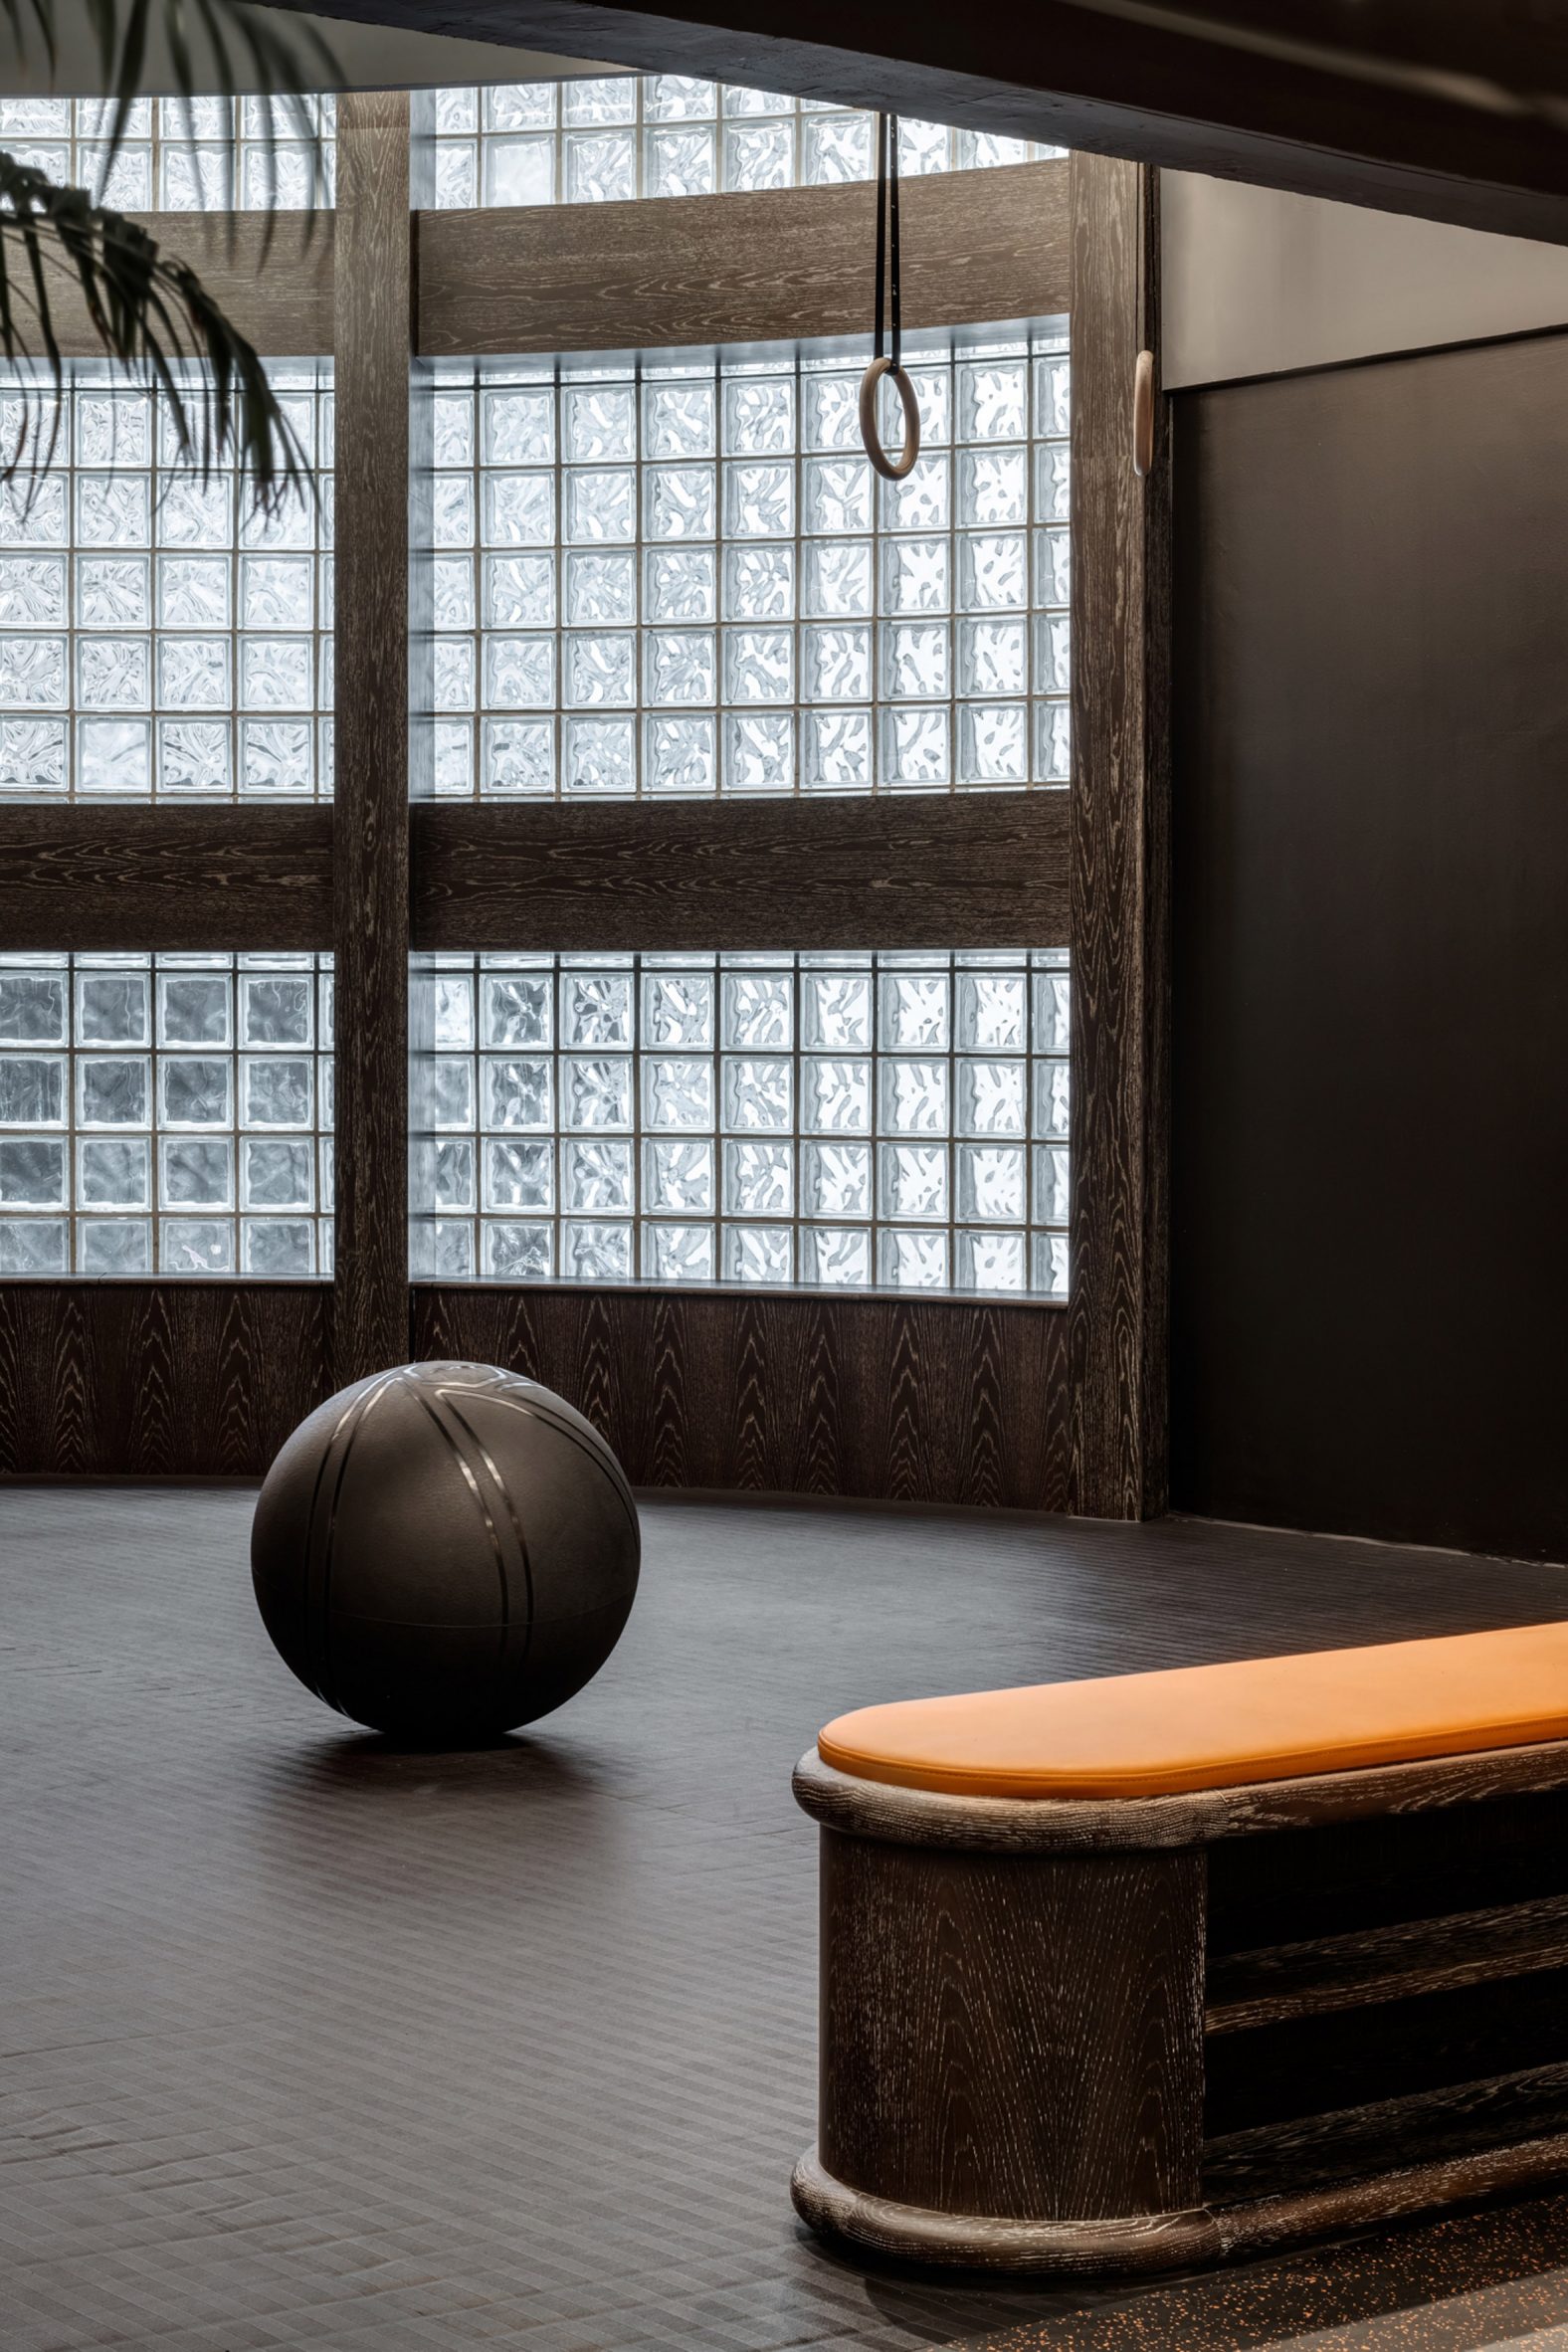 Workout area inside Hong Kong gym by MR Studio